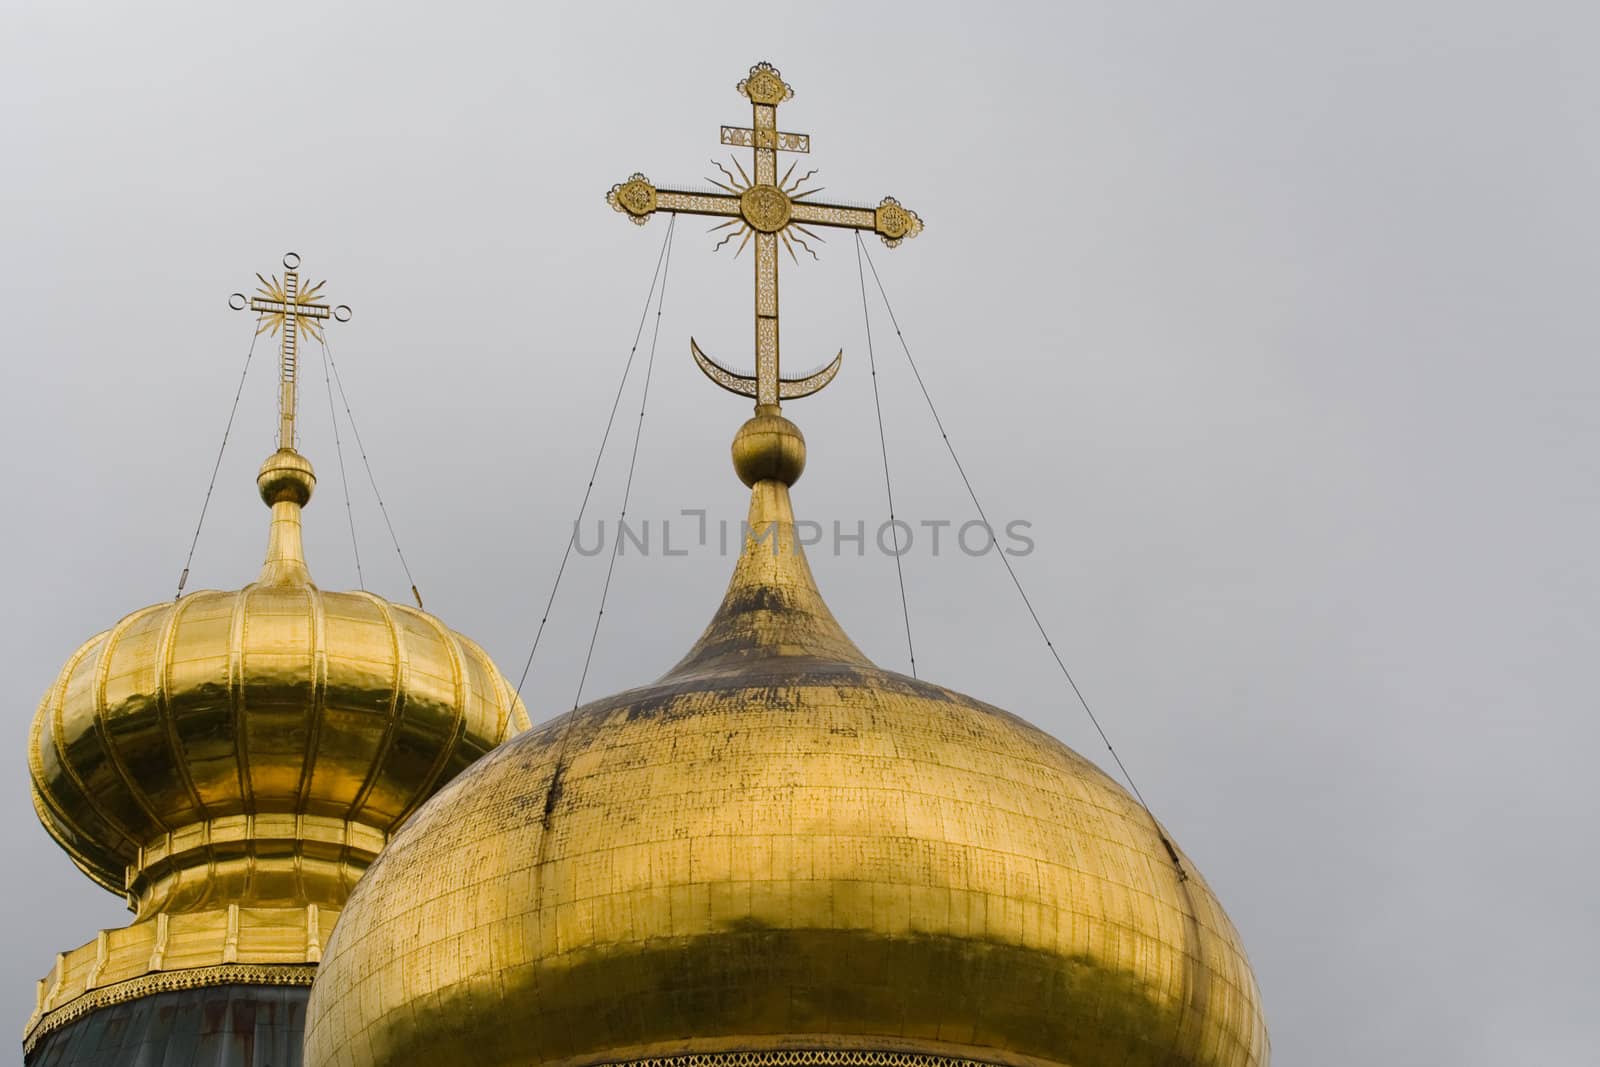 Two cupolas with orthodox crosses
